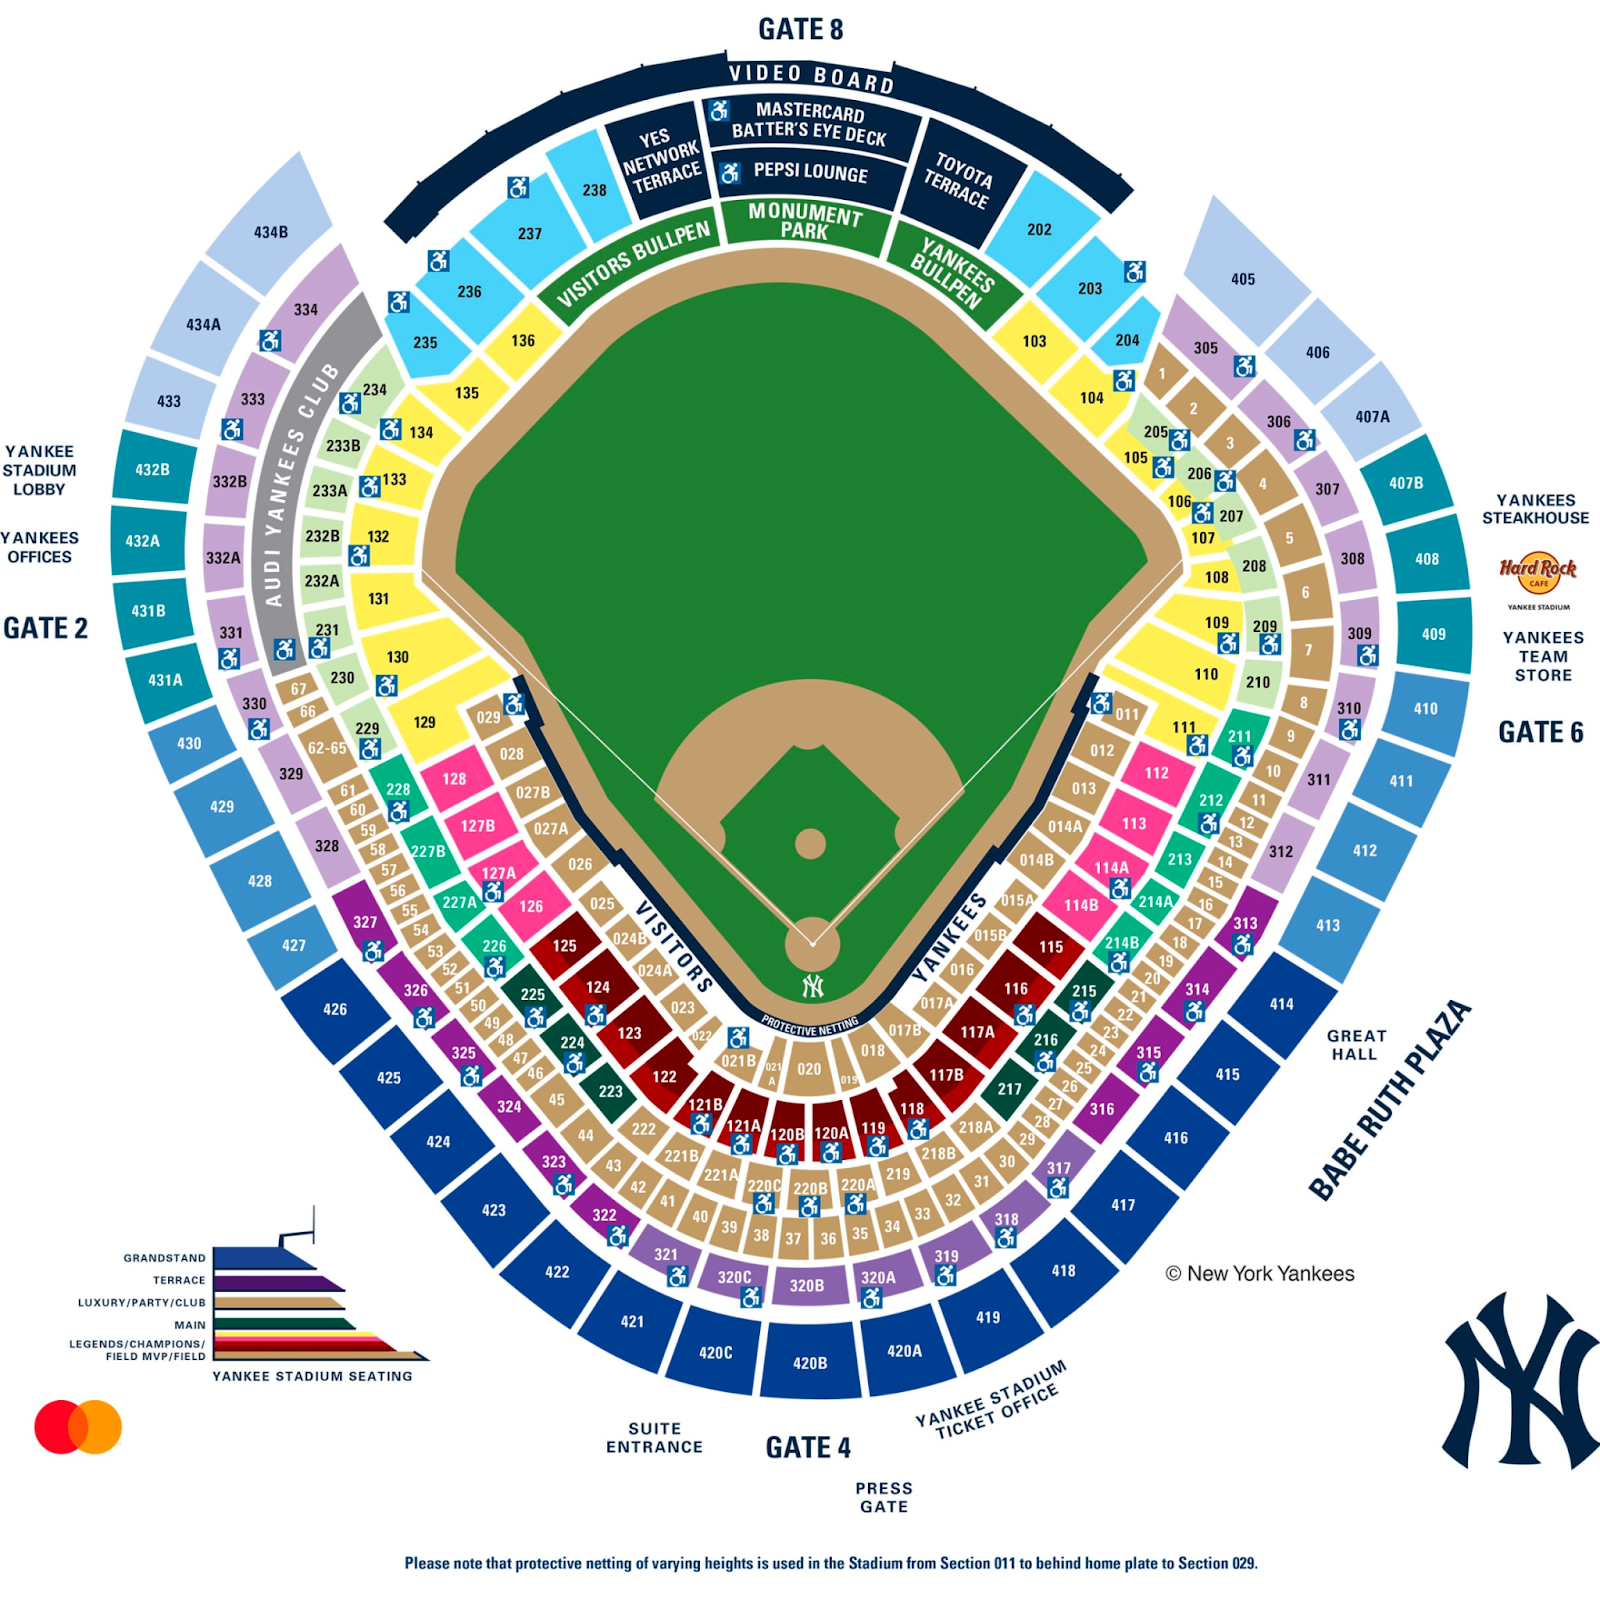 Map of Yankee Stadium showing the various seating and suite options